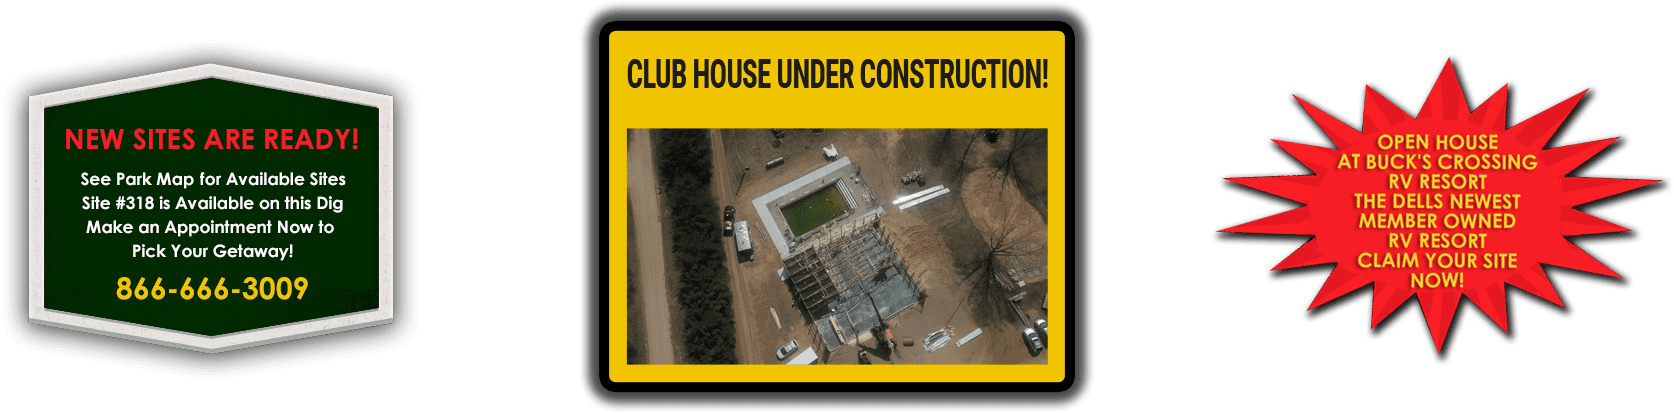 New sites are ready! | Club House under construction!